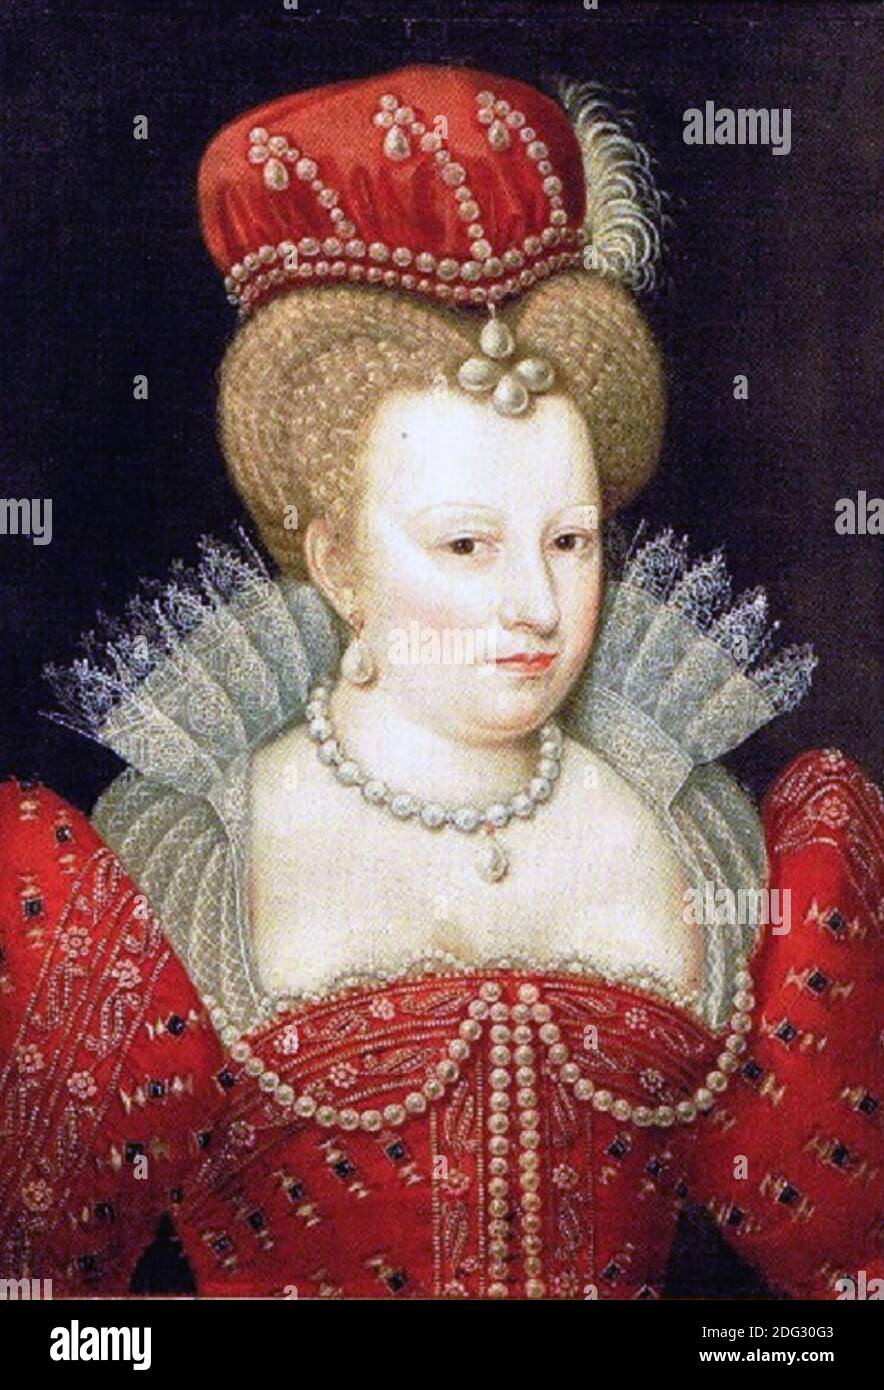 MARGARET OF VALOIS (1553-1615)  Later Queen of Navarre and France by her marriage to Henry IV. Artist unknown. Stock Photo